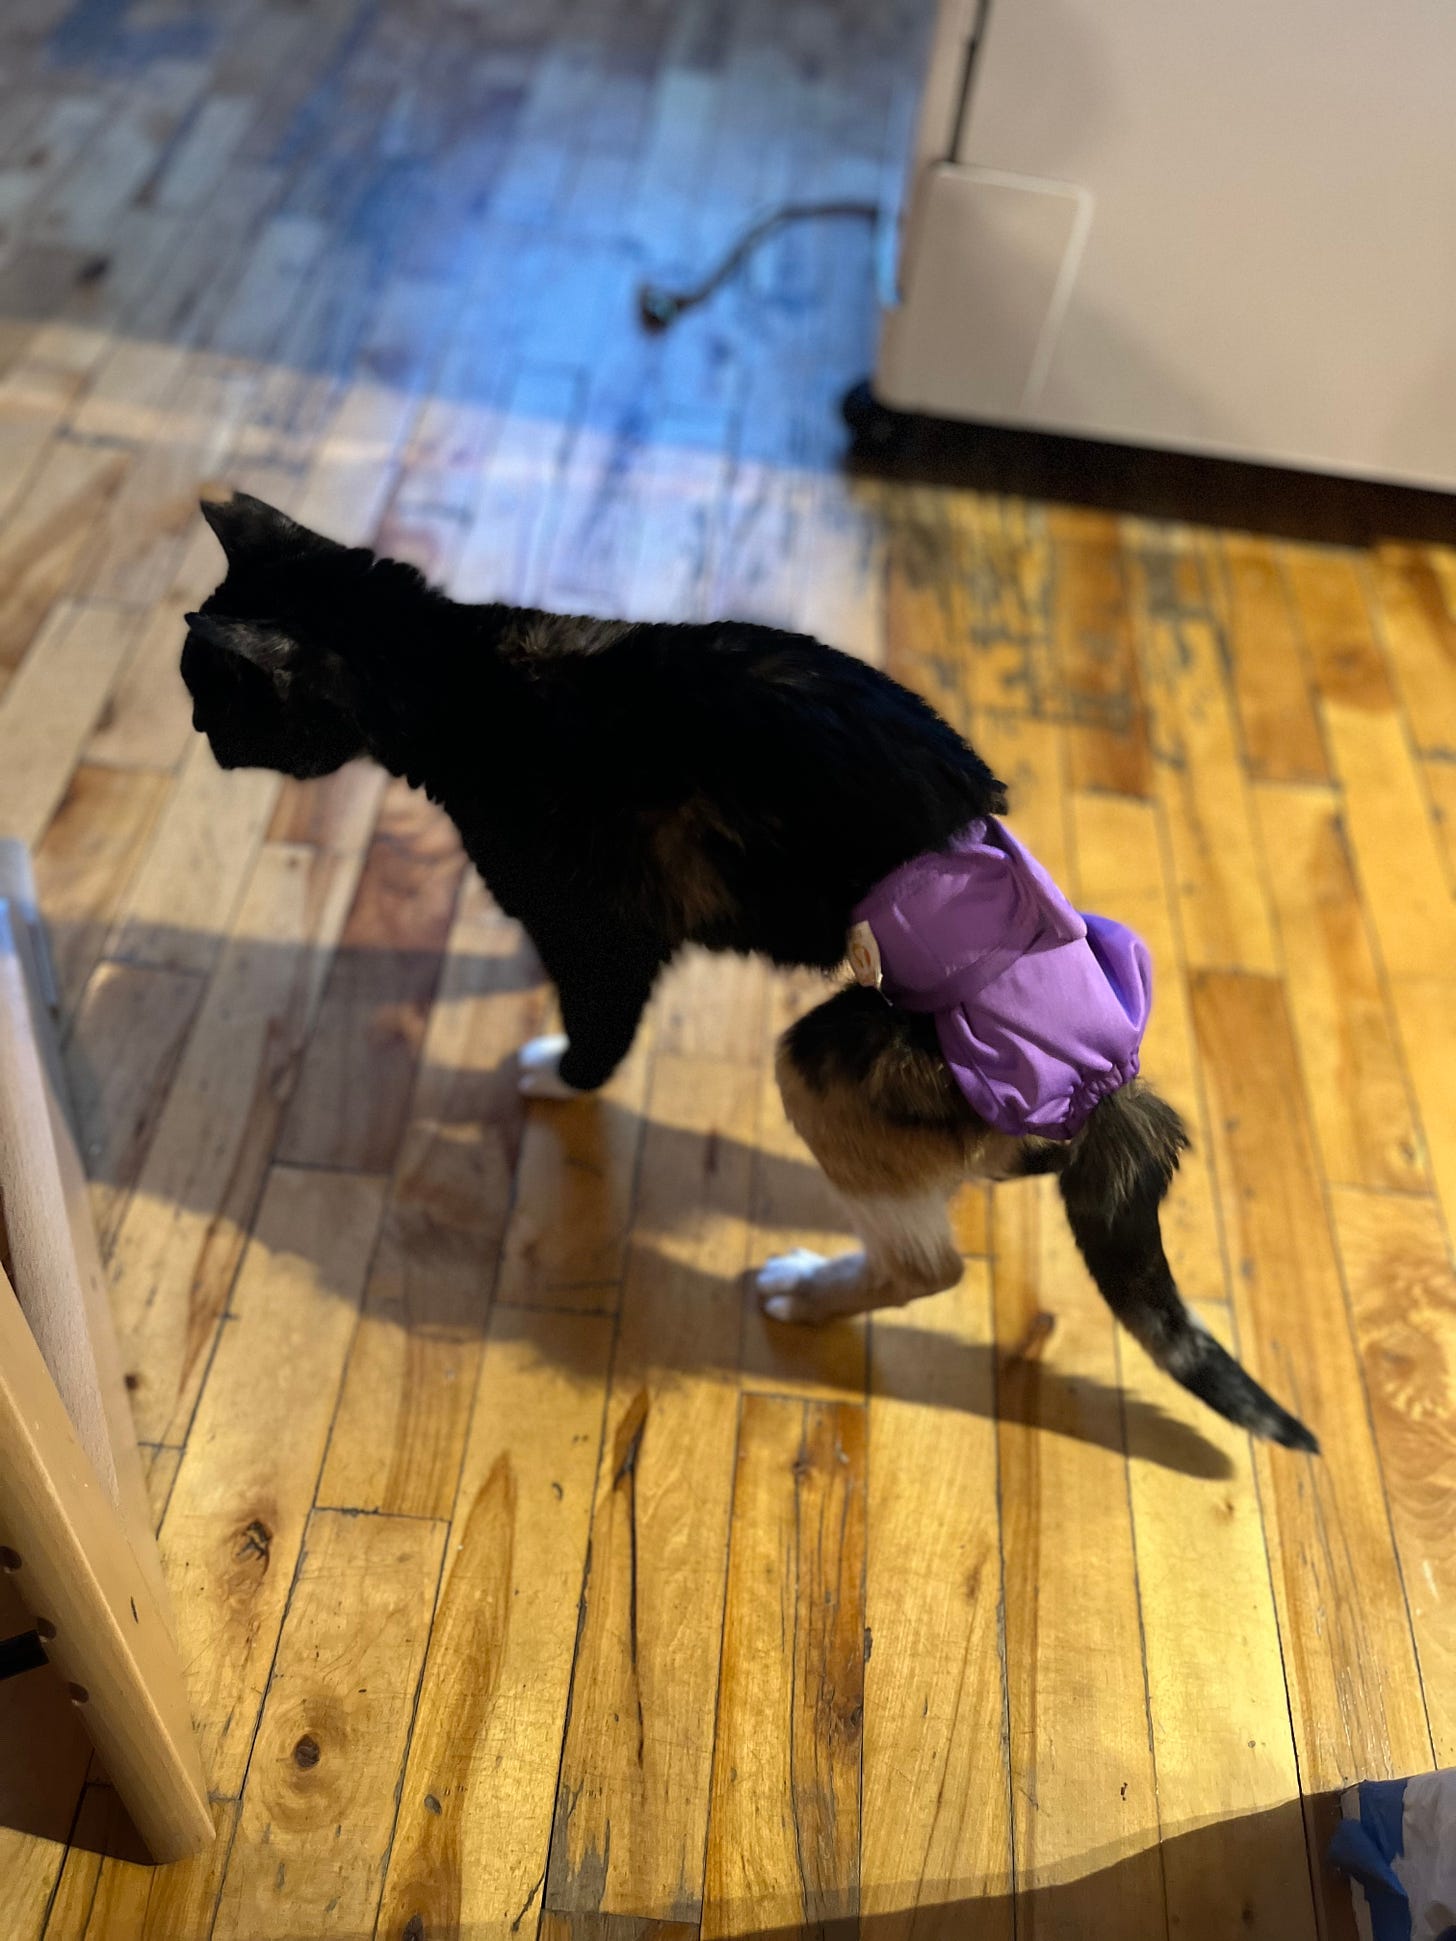 A small, dark-colored cat in a purple diaper on a hardwood floor.